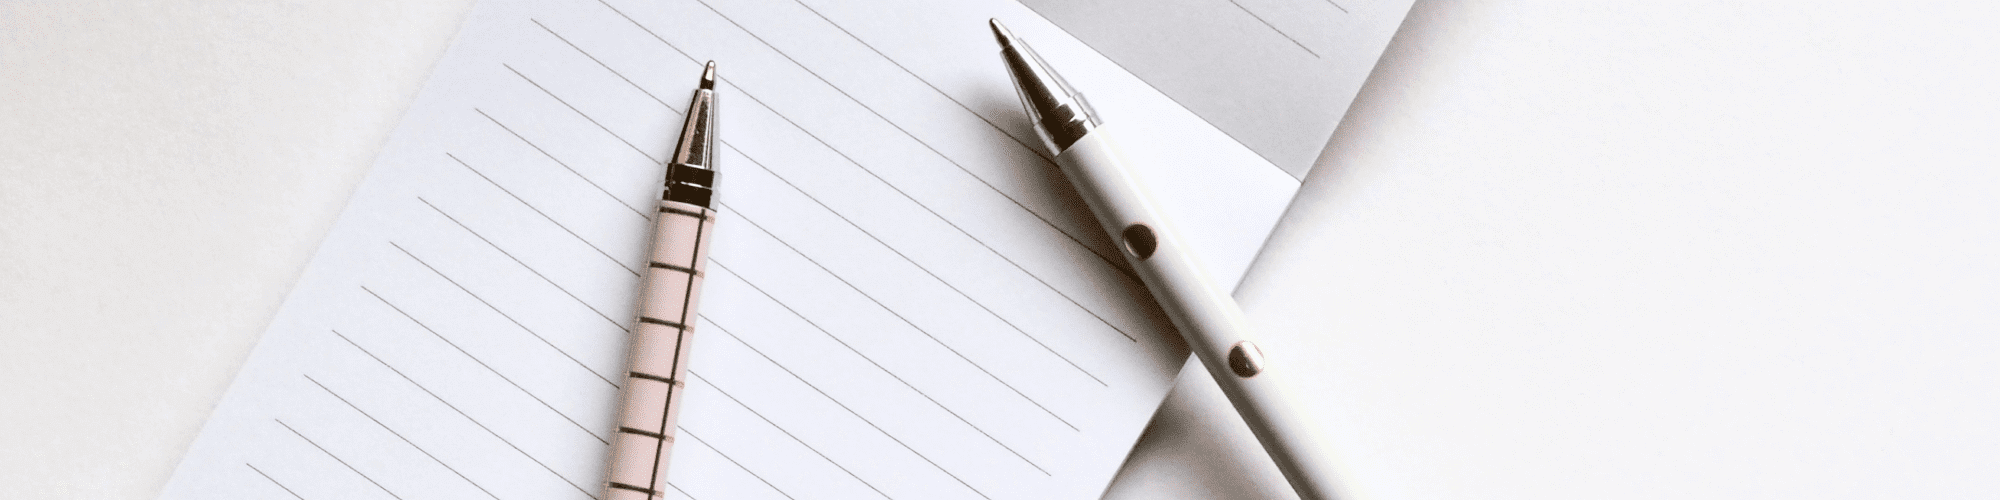 pencils and paper on a table - business writing